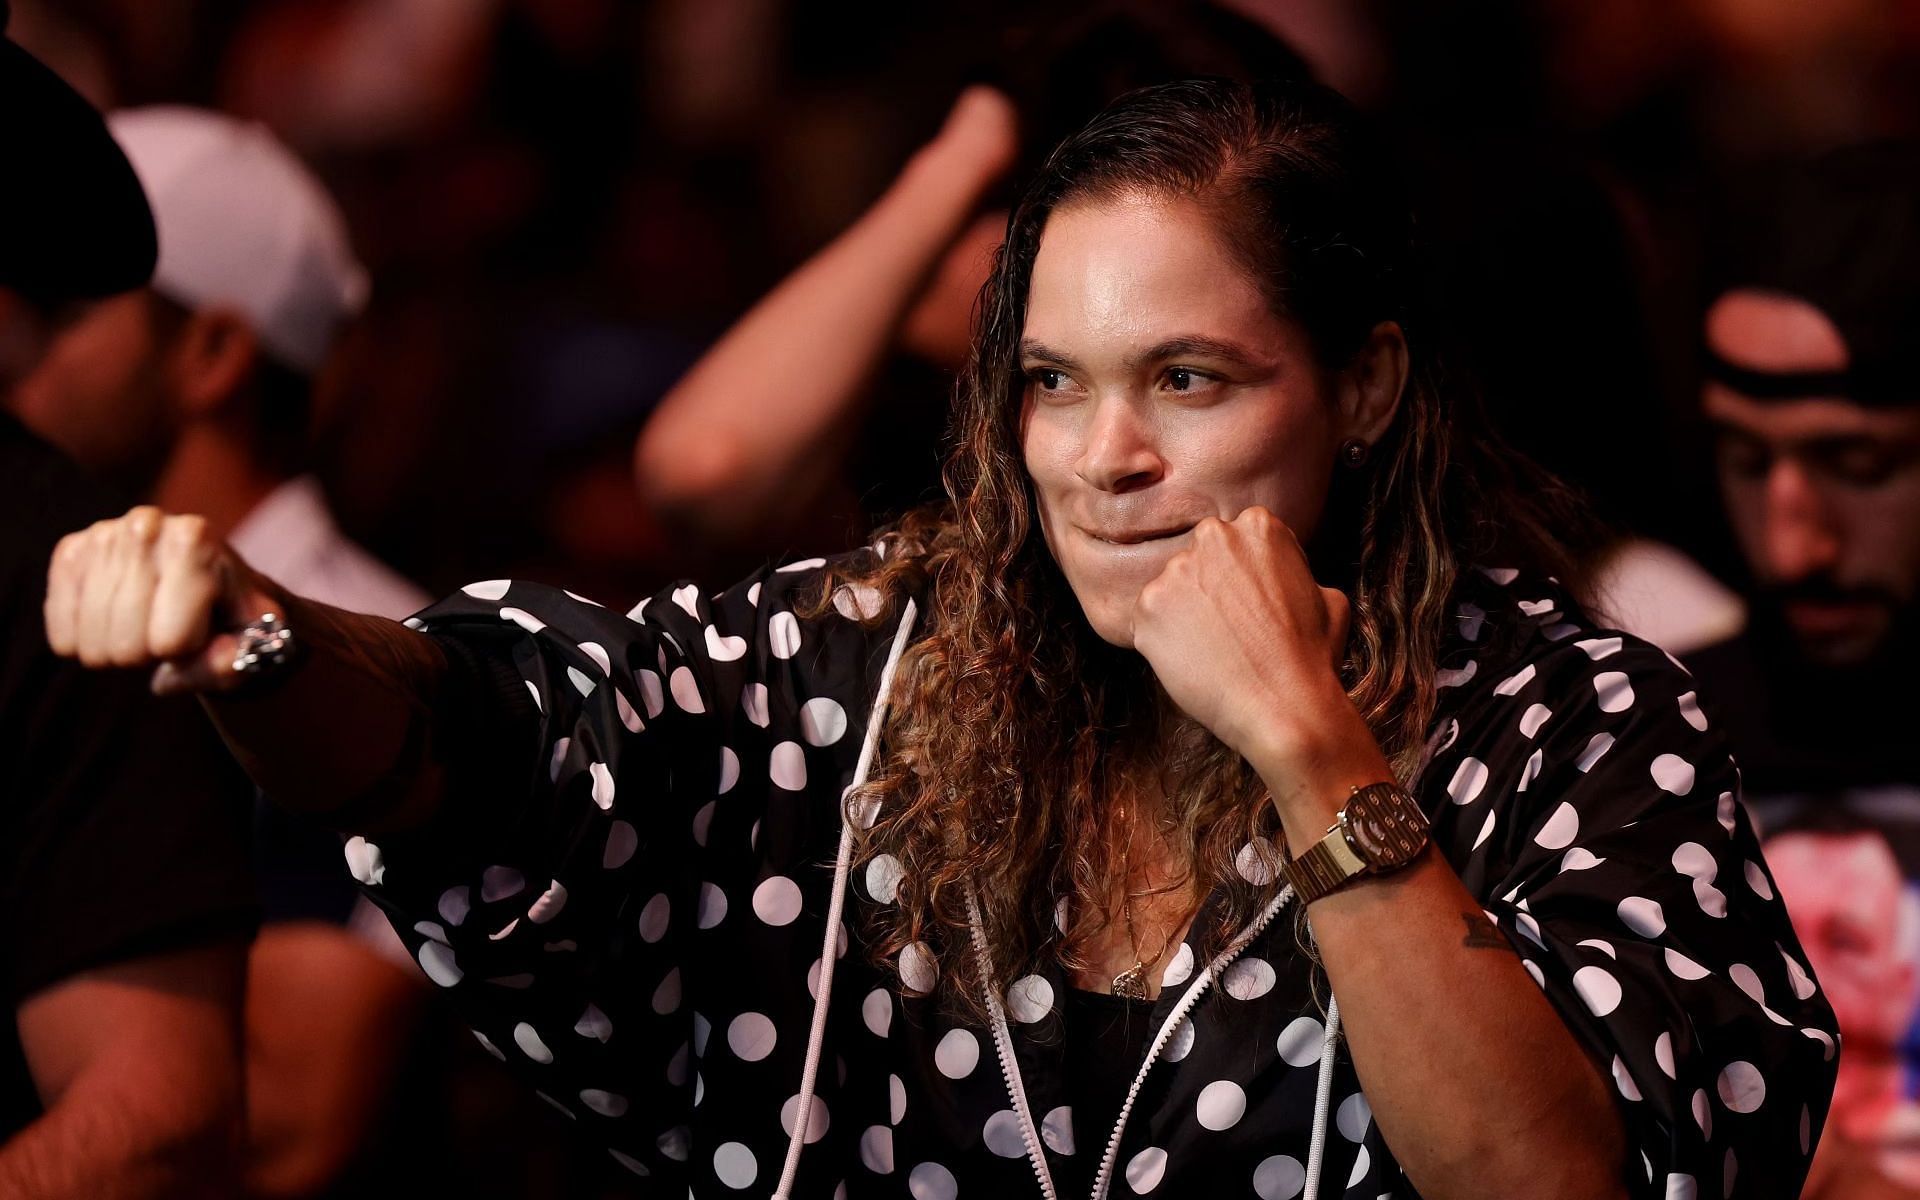 Amanda Nunes commented on defending her featherweight title